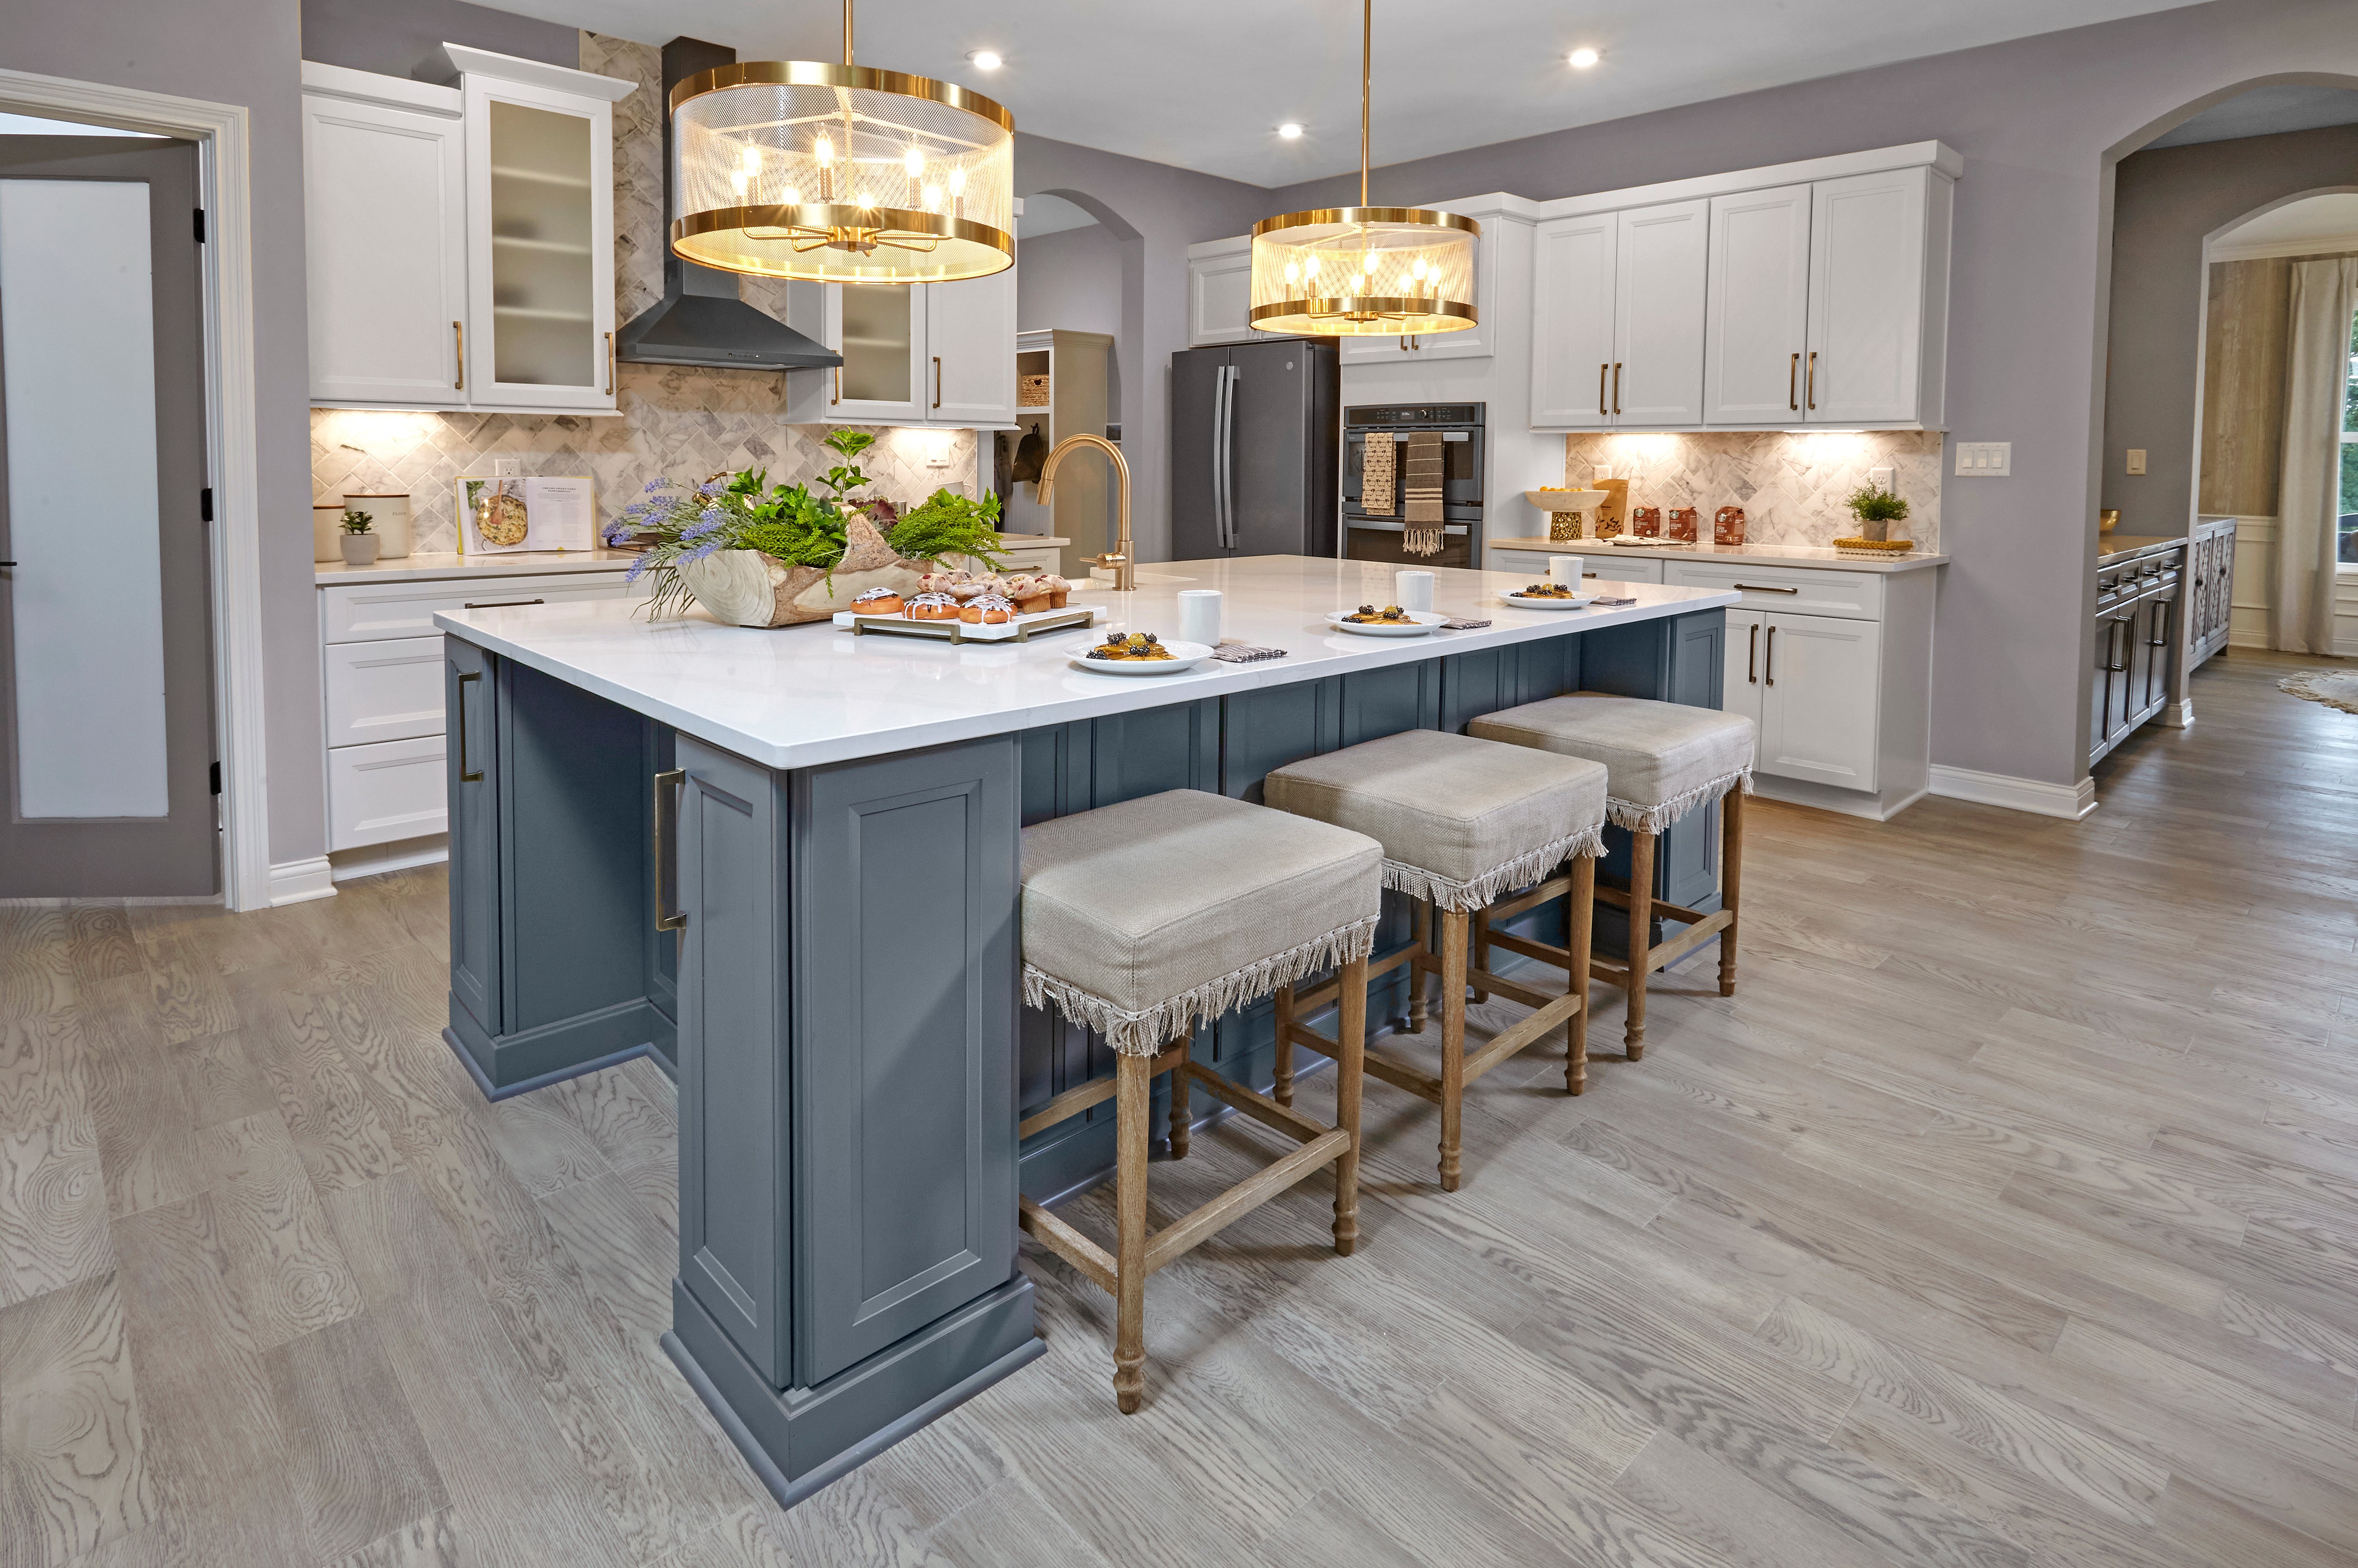 Leland Model Home at Chatham Brook at Chatham Hills large island kitchen with multi-height cabinetry